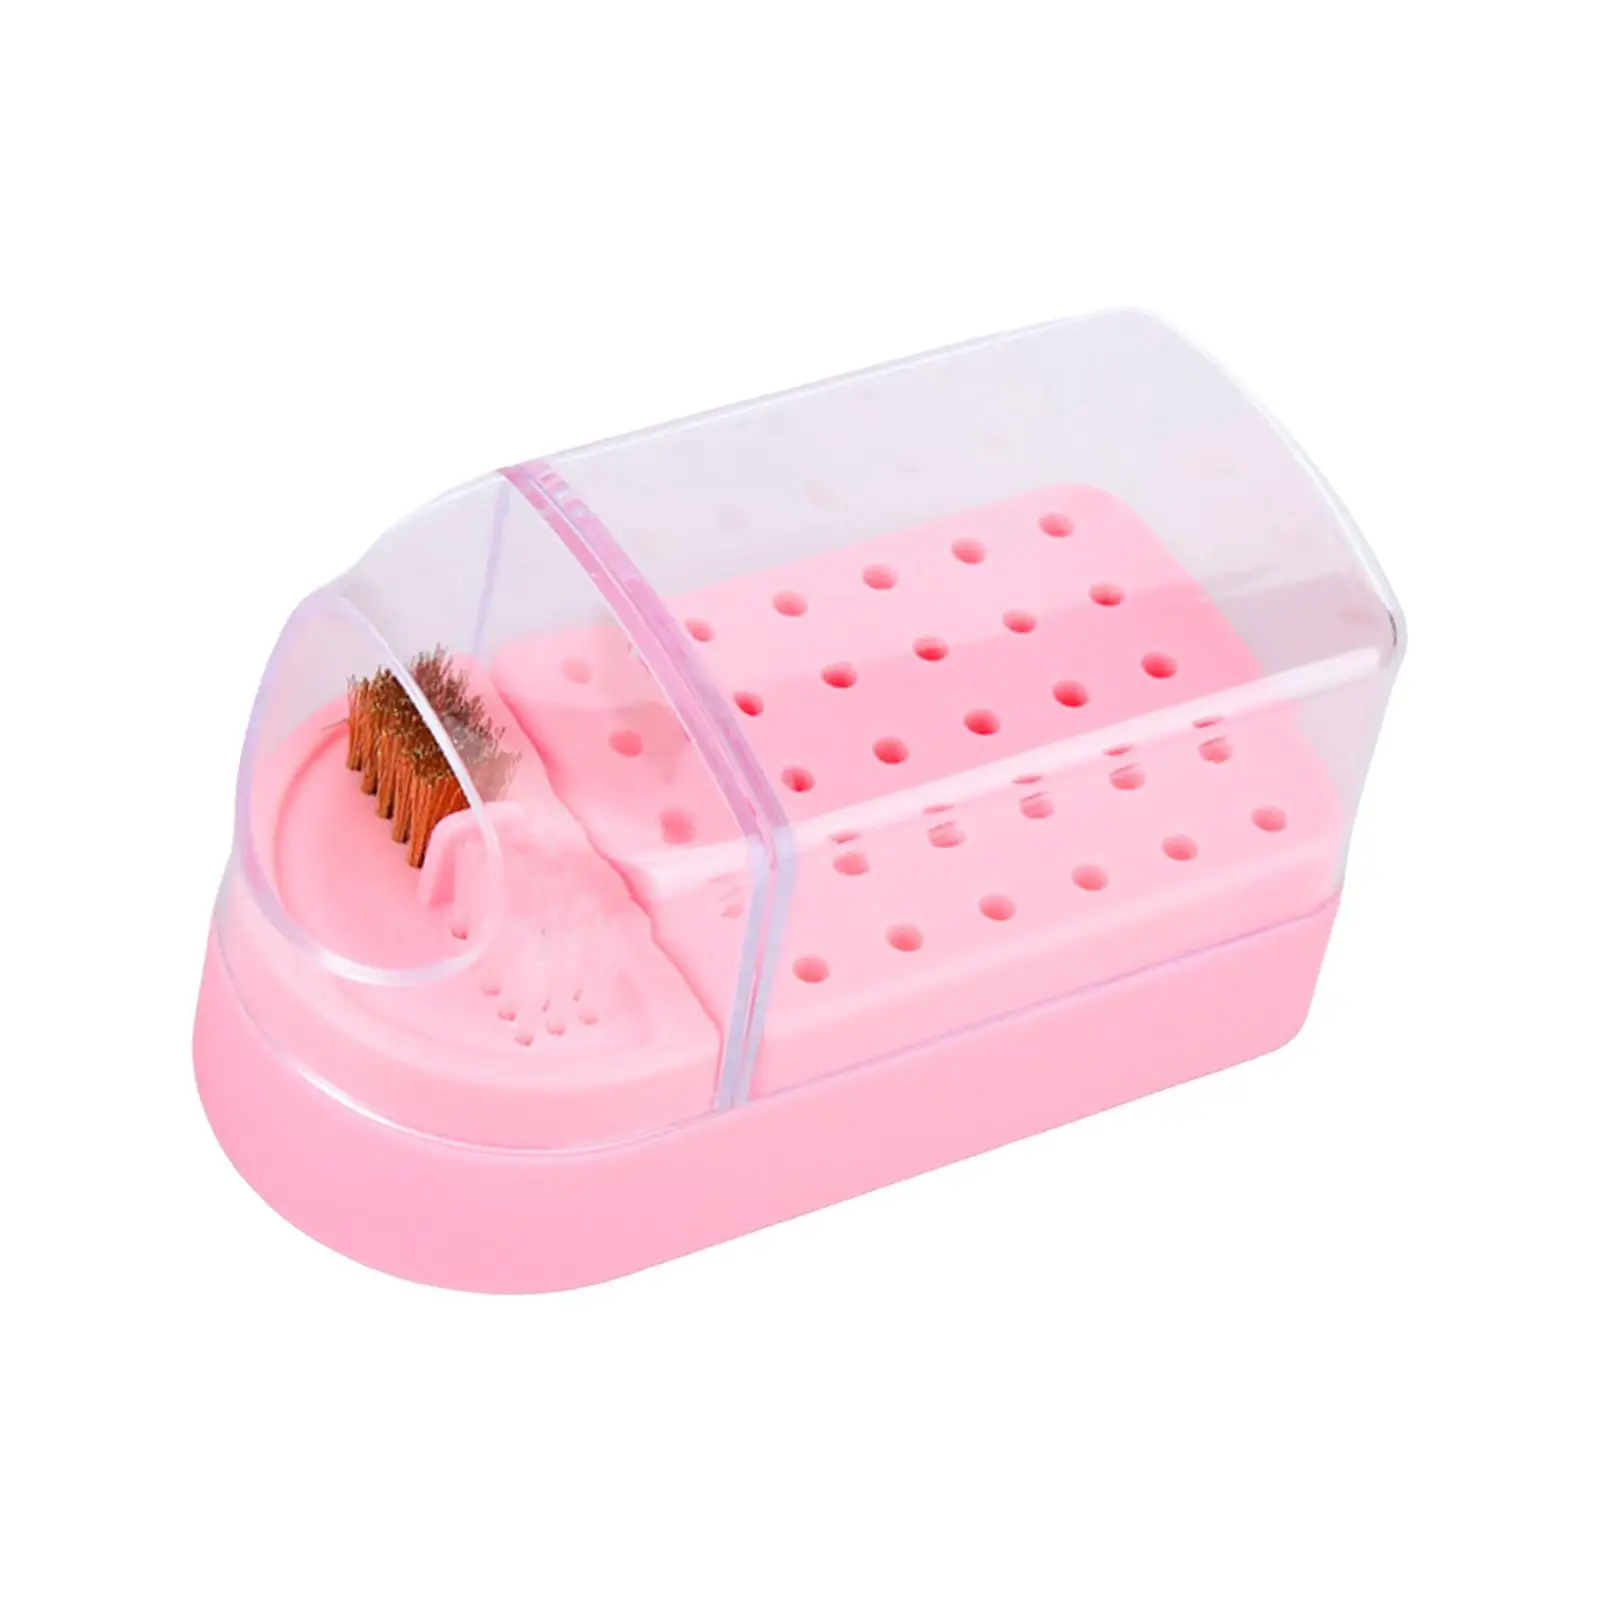 Nail Drill Bit Holder Lightweight Professional 30 Holes Dustproof Portable Storage Container Manicure Tools Drill Bit Stand